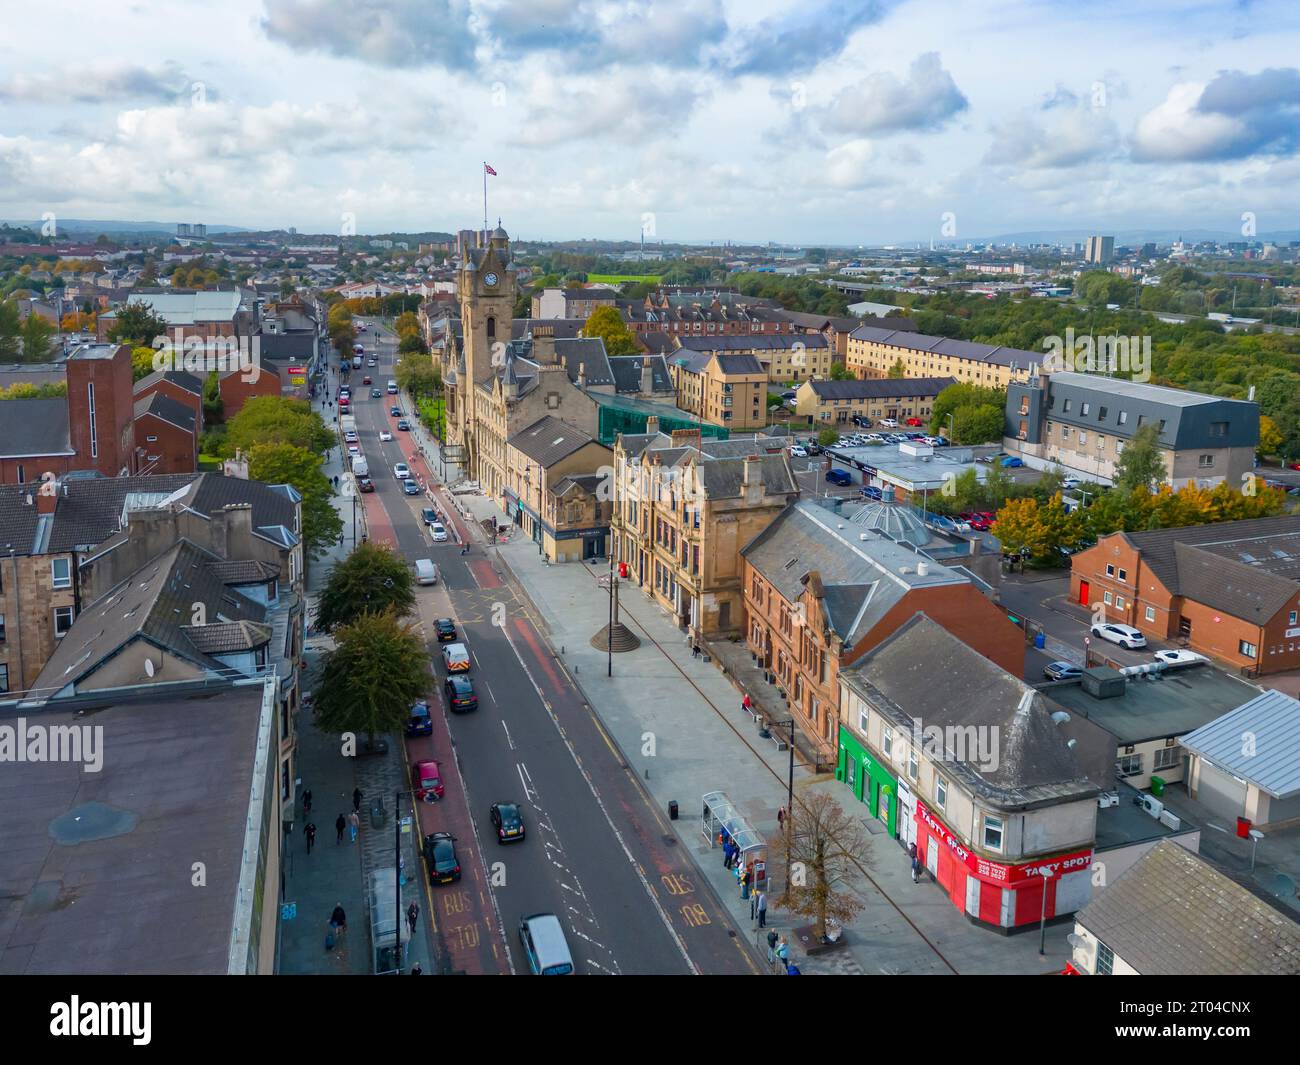 Aerial view of town centre of Rutherglen, South Lanarkshire, Scotland, UK Stock Photo